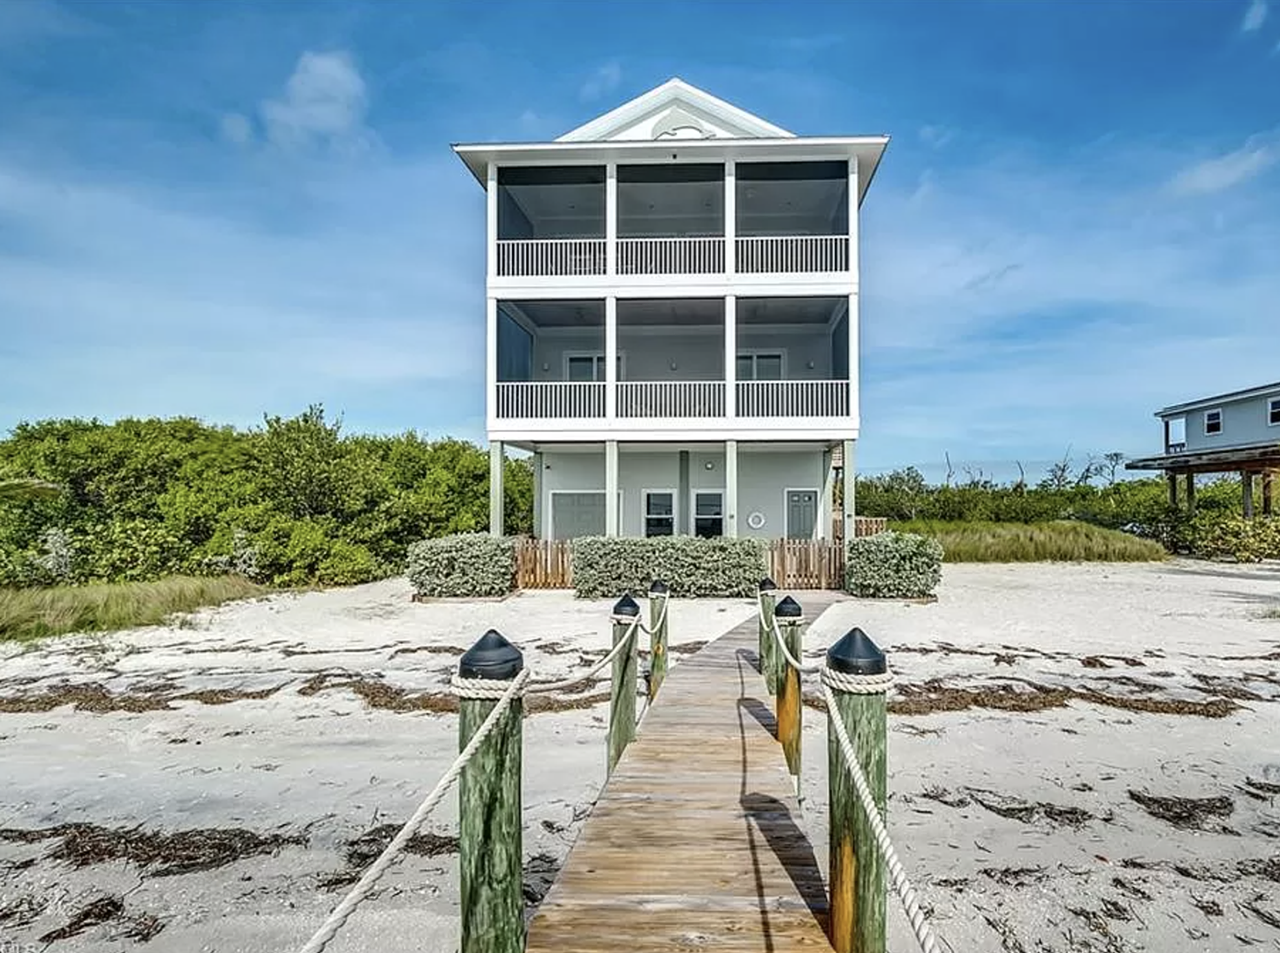 A rare off-the-grid island beach house in Florida is for sale, and it's only accessible only by boat